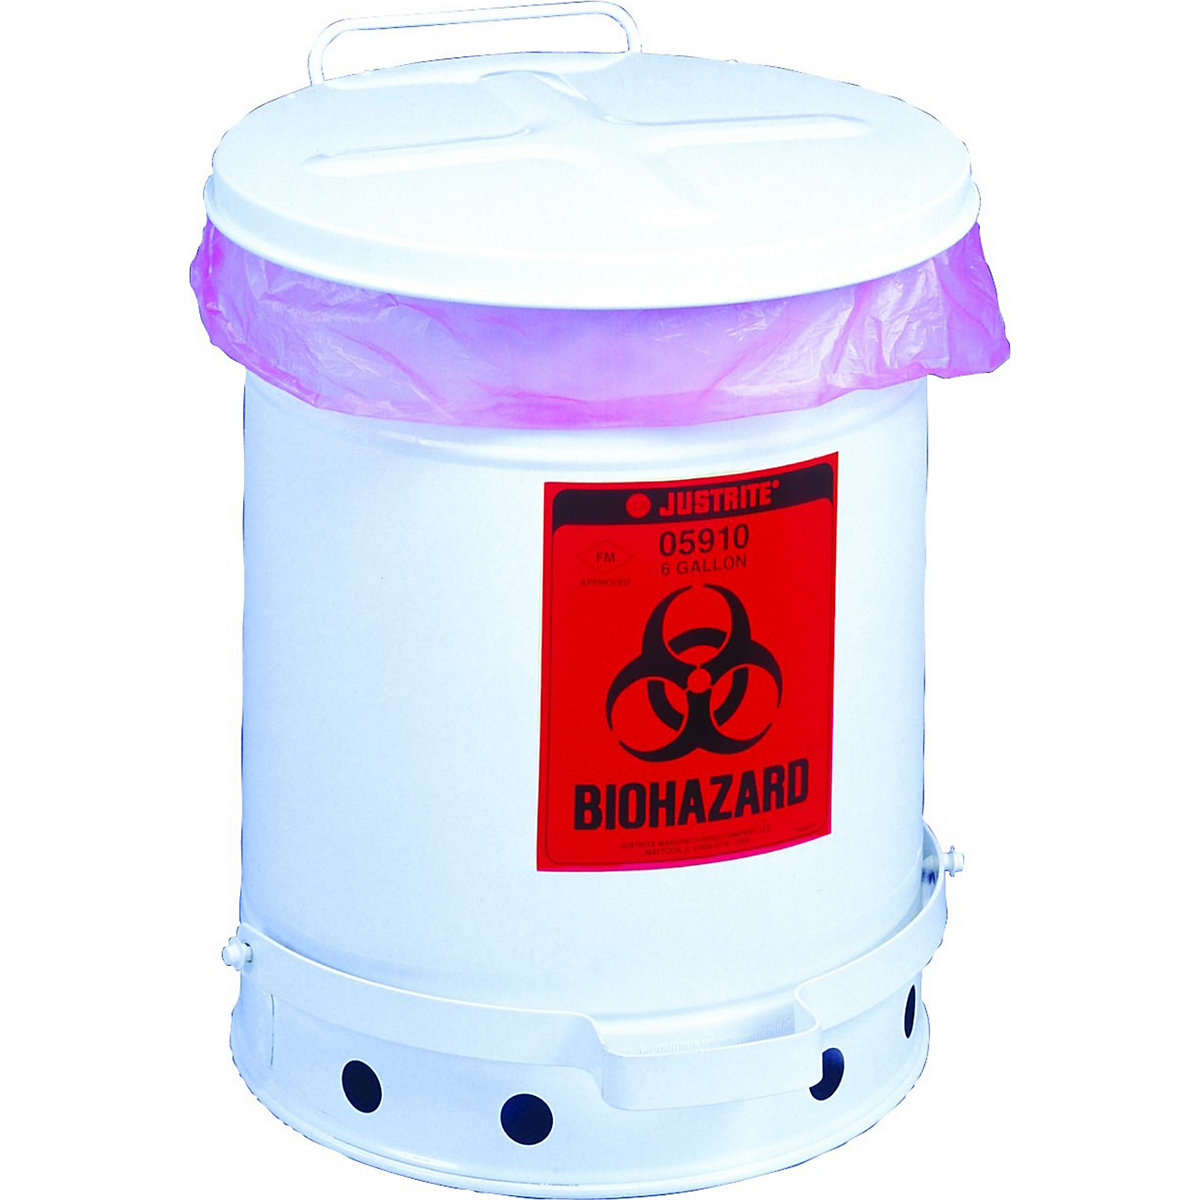 Justrite 25880-MOQ2 Label Kit for Biohazard Cans 